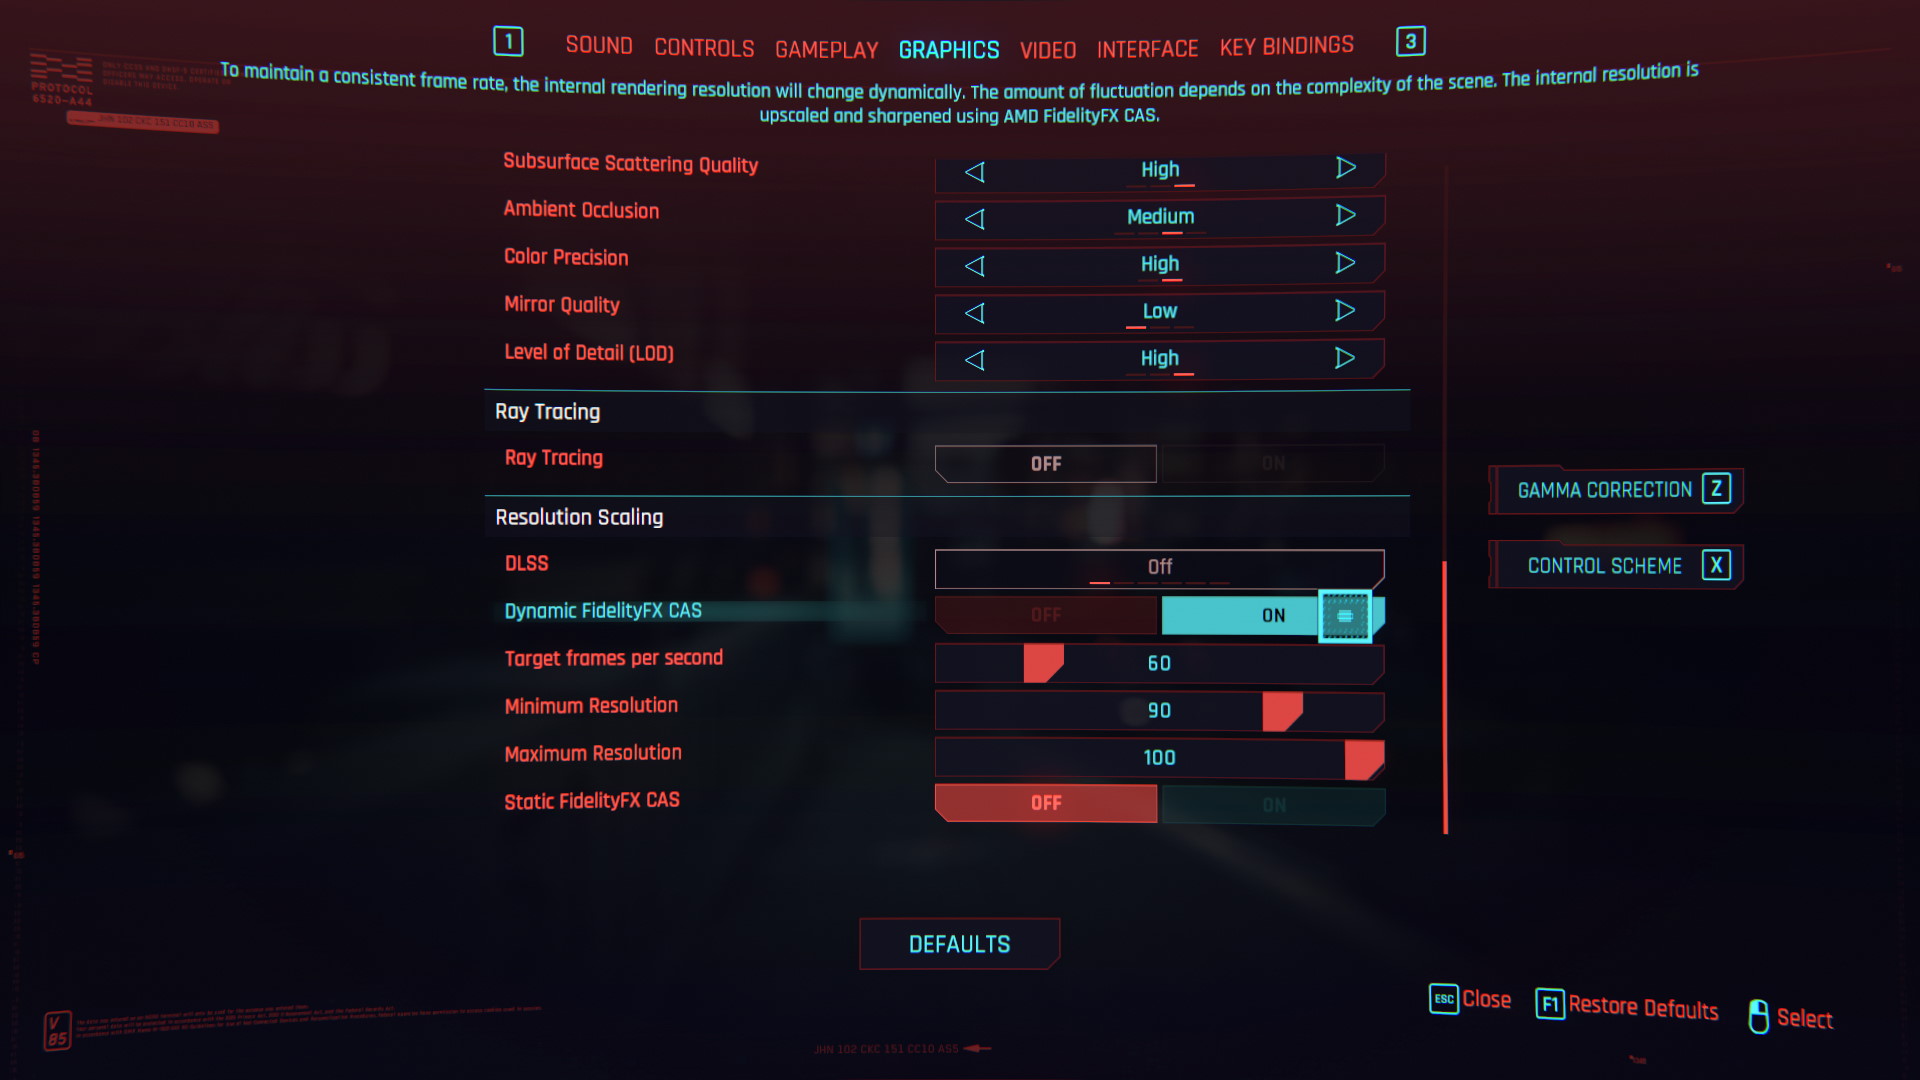 Launch Cyberpunk 2077 and navigate to the Settings menu.
Select the Graphics tab.